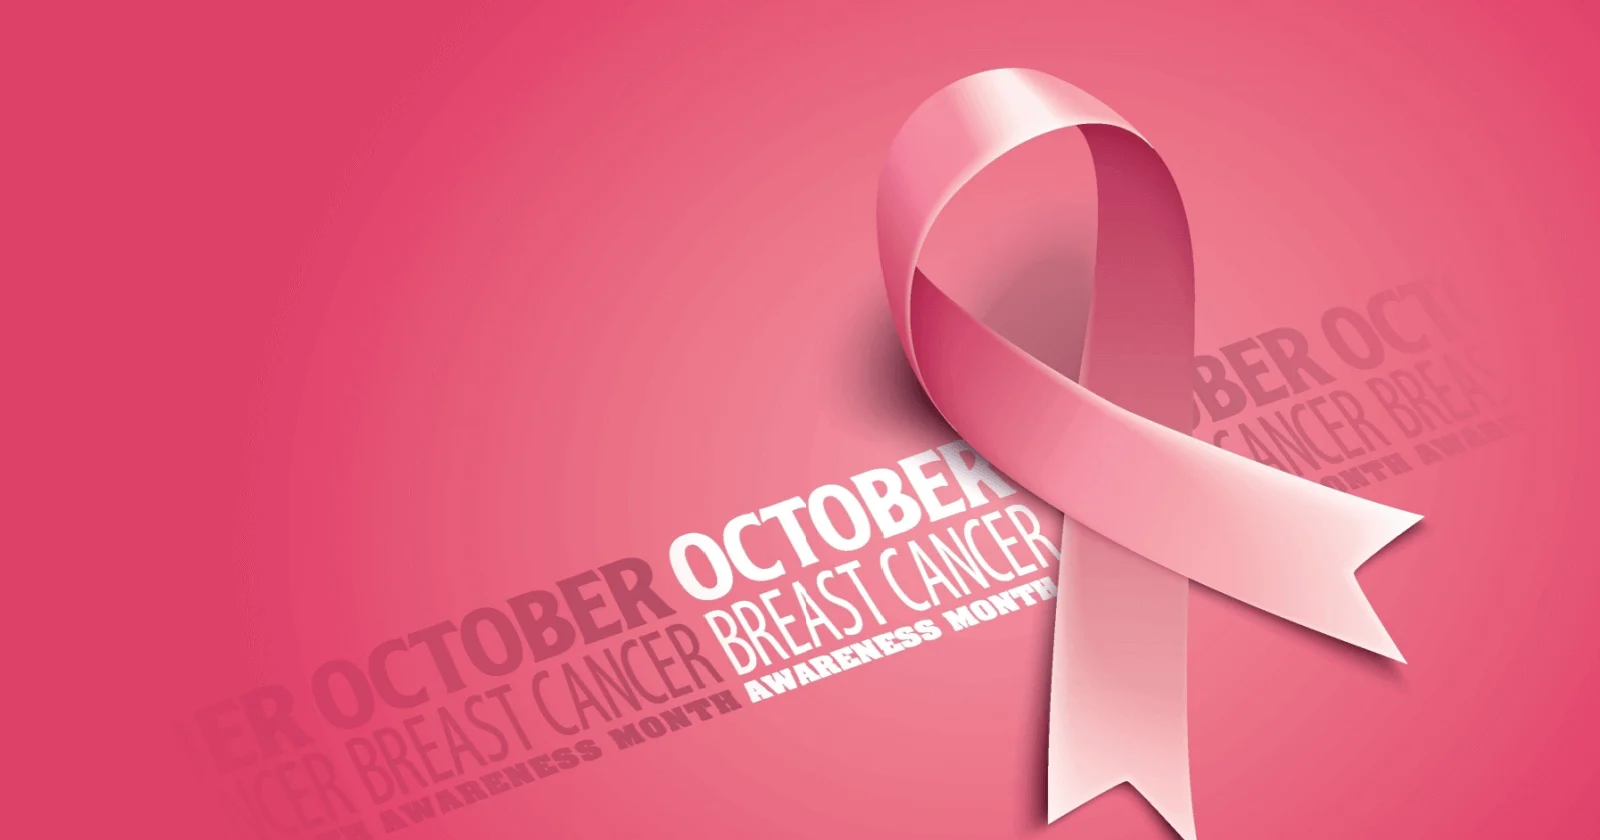 How does breast cancer affect life insurance?